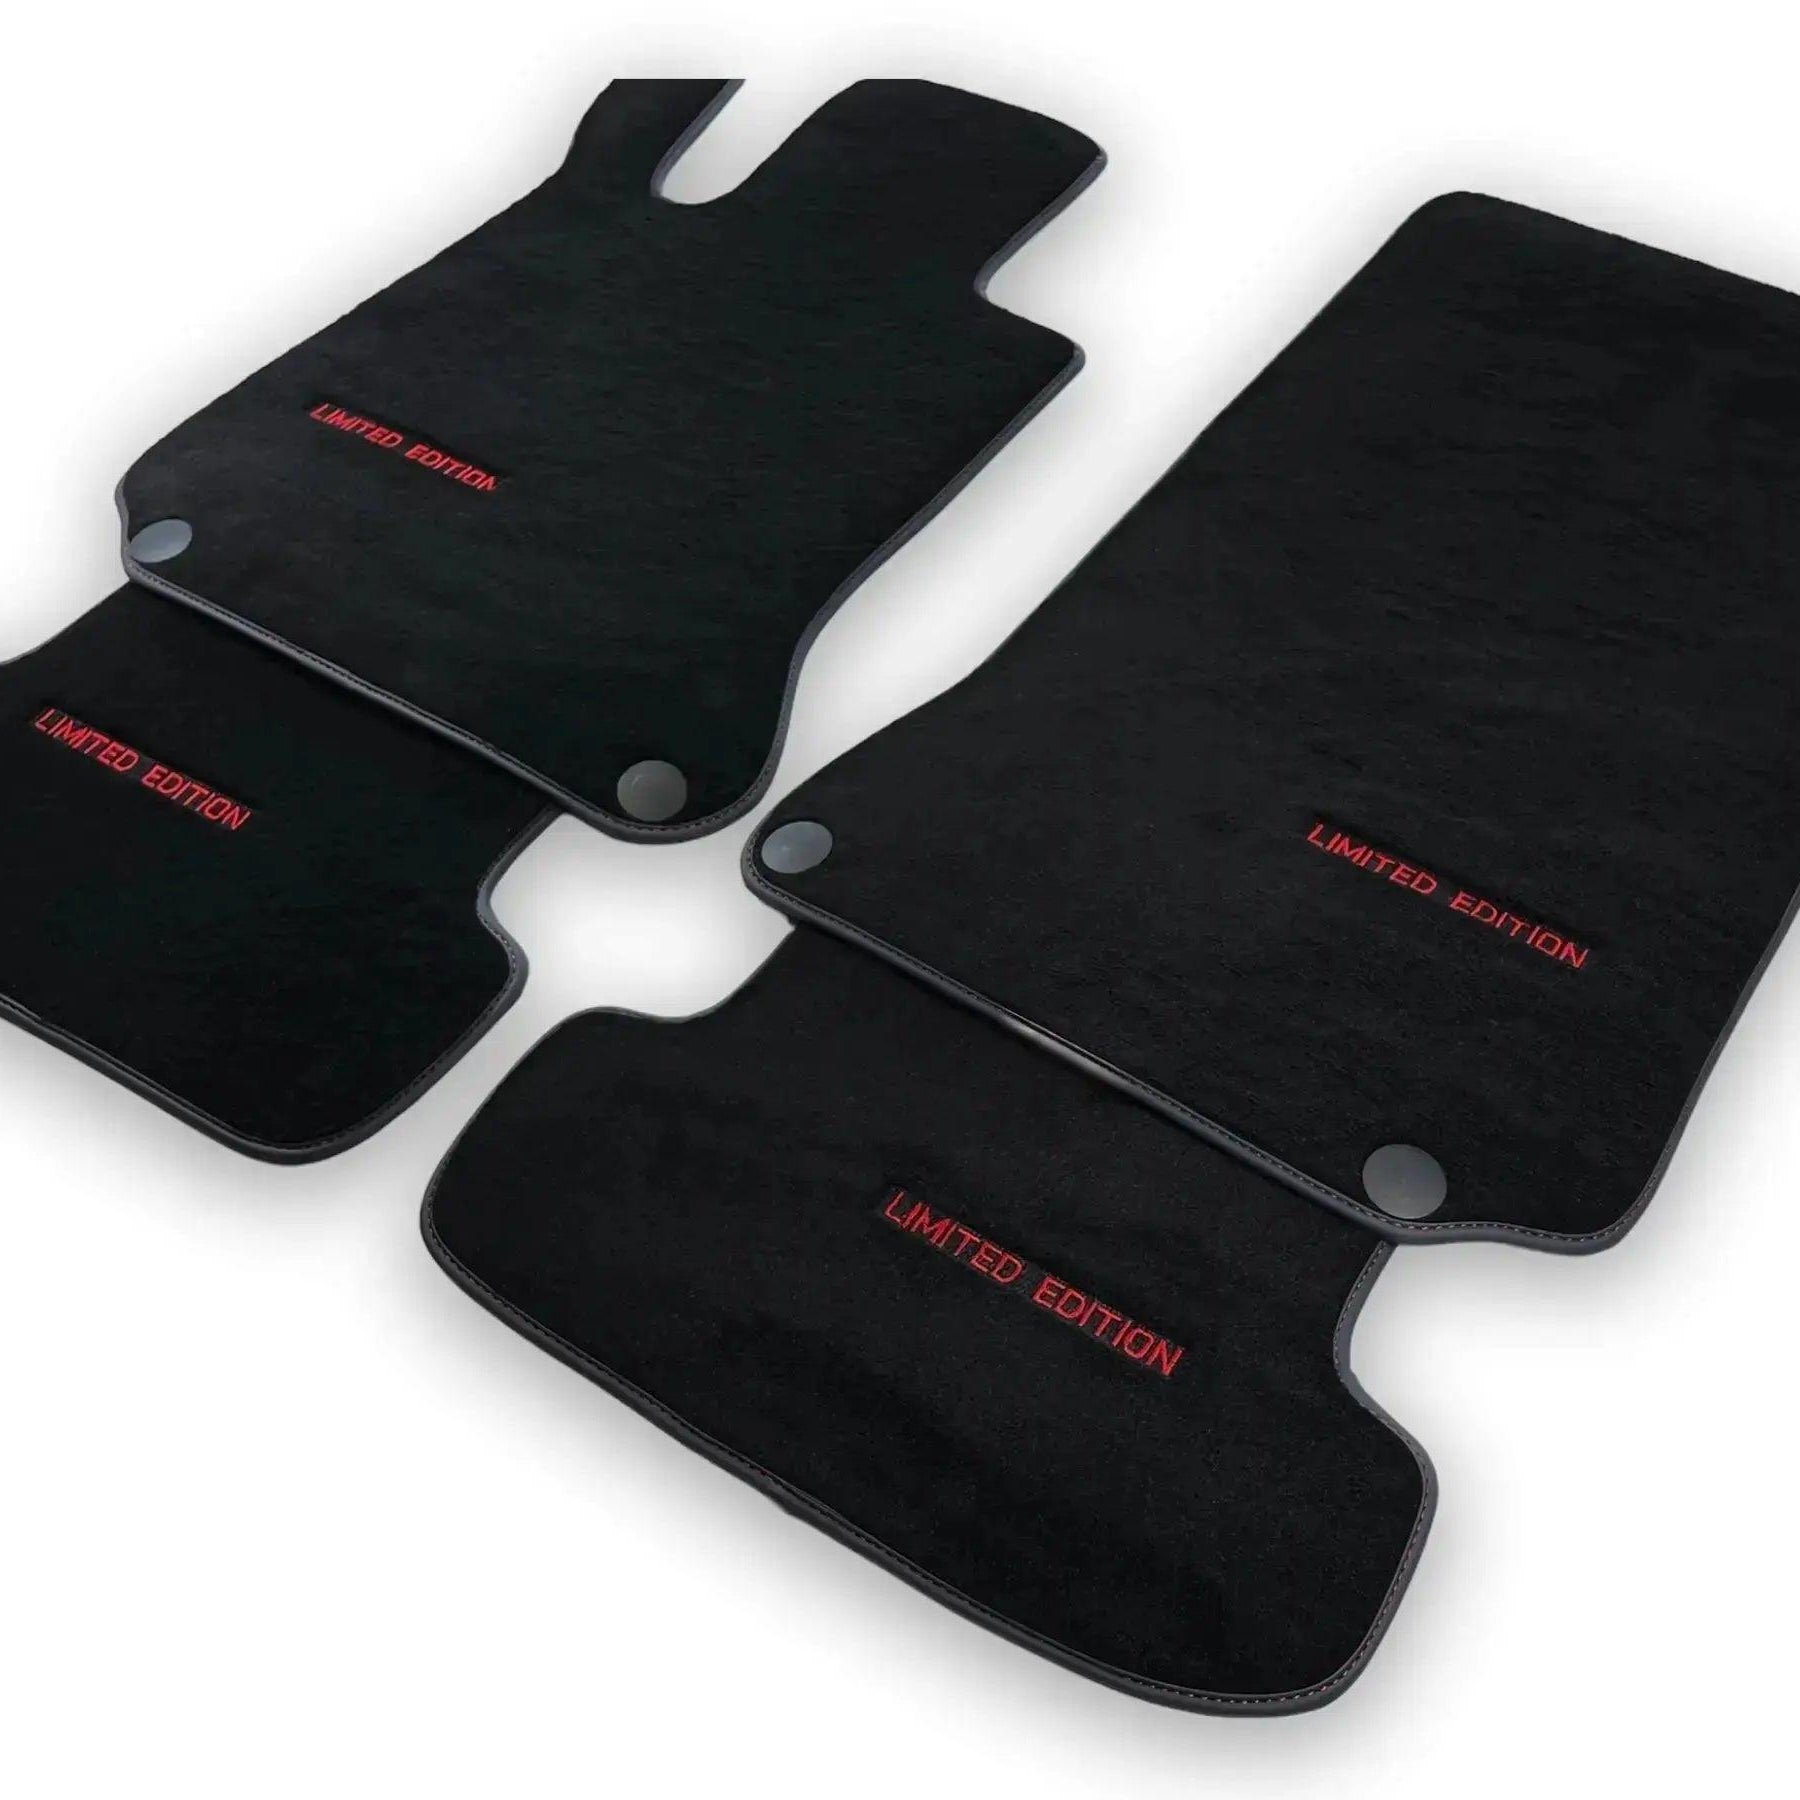 Gray Floor Mats For Mercedes Benz S-Class V223 (2021-2023) Hybrid | Limited Edition